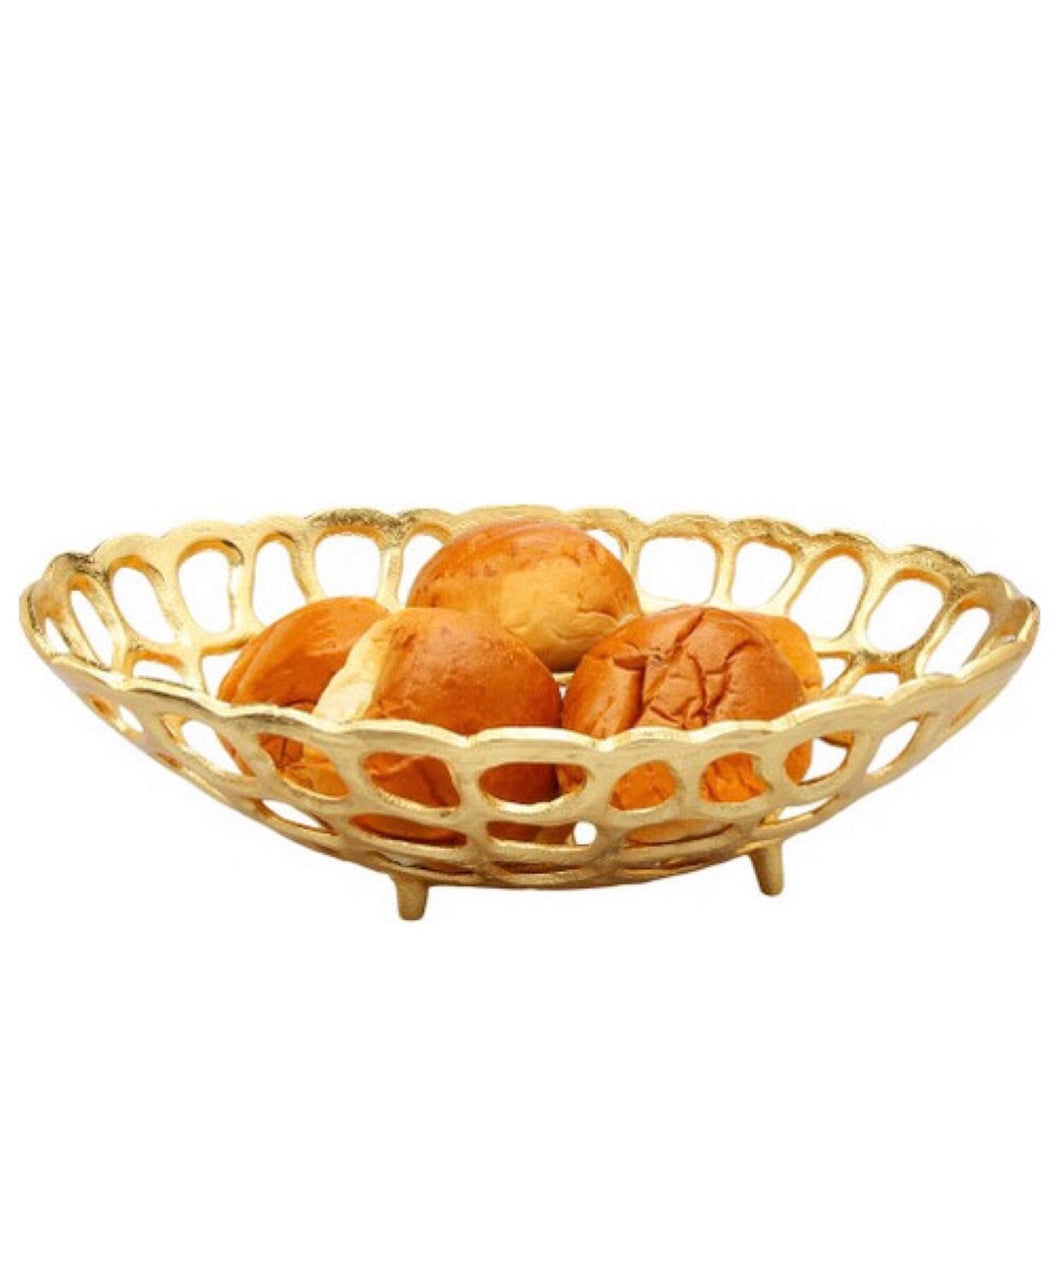 Gold Oval Looped Bread Basket